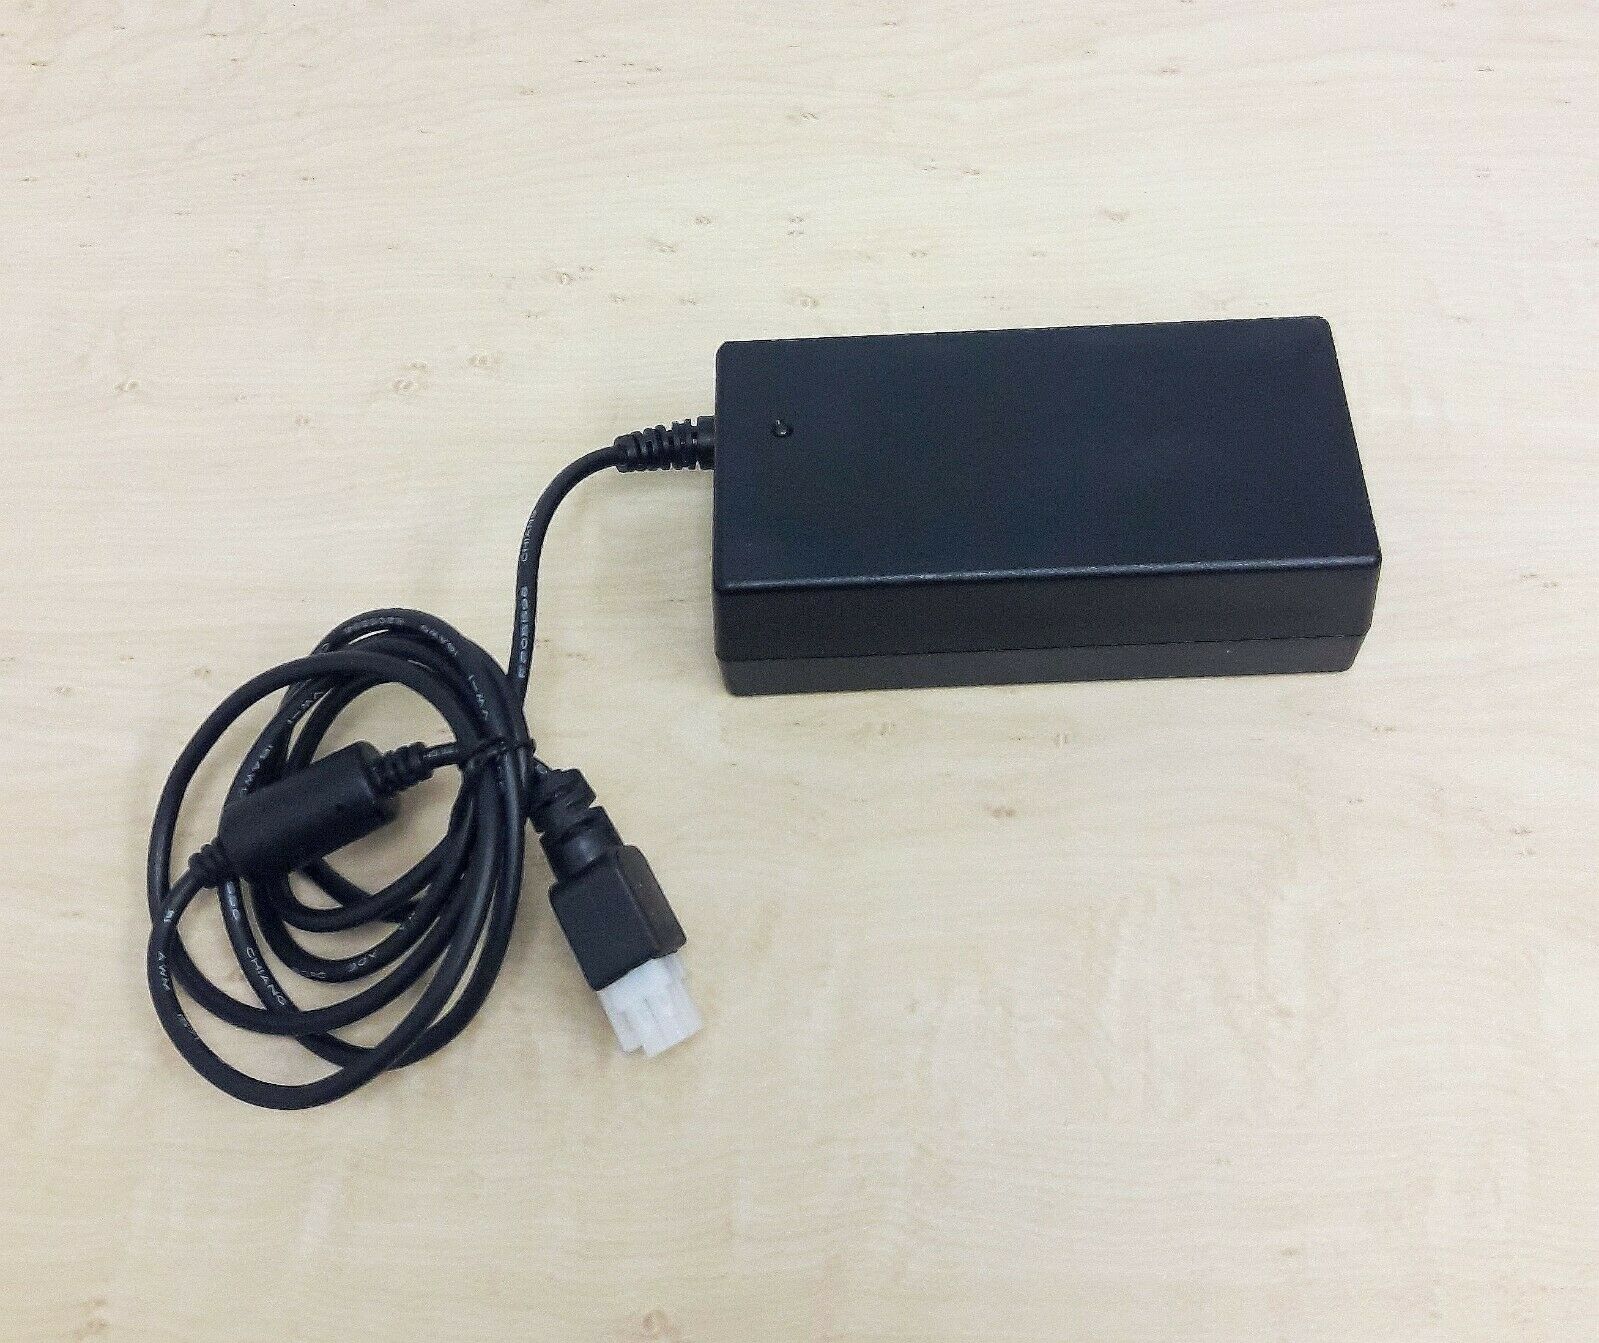 Emerson DP4012N3M Ac Adapter Power Supply Cord Cable